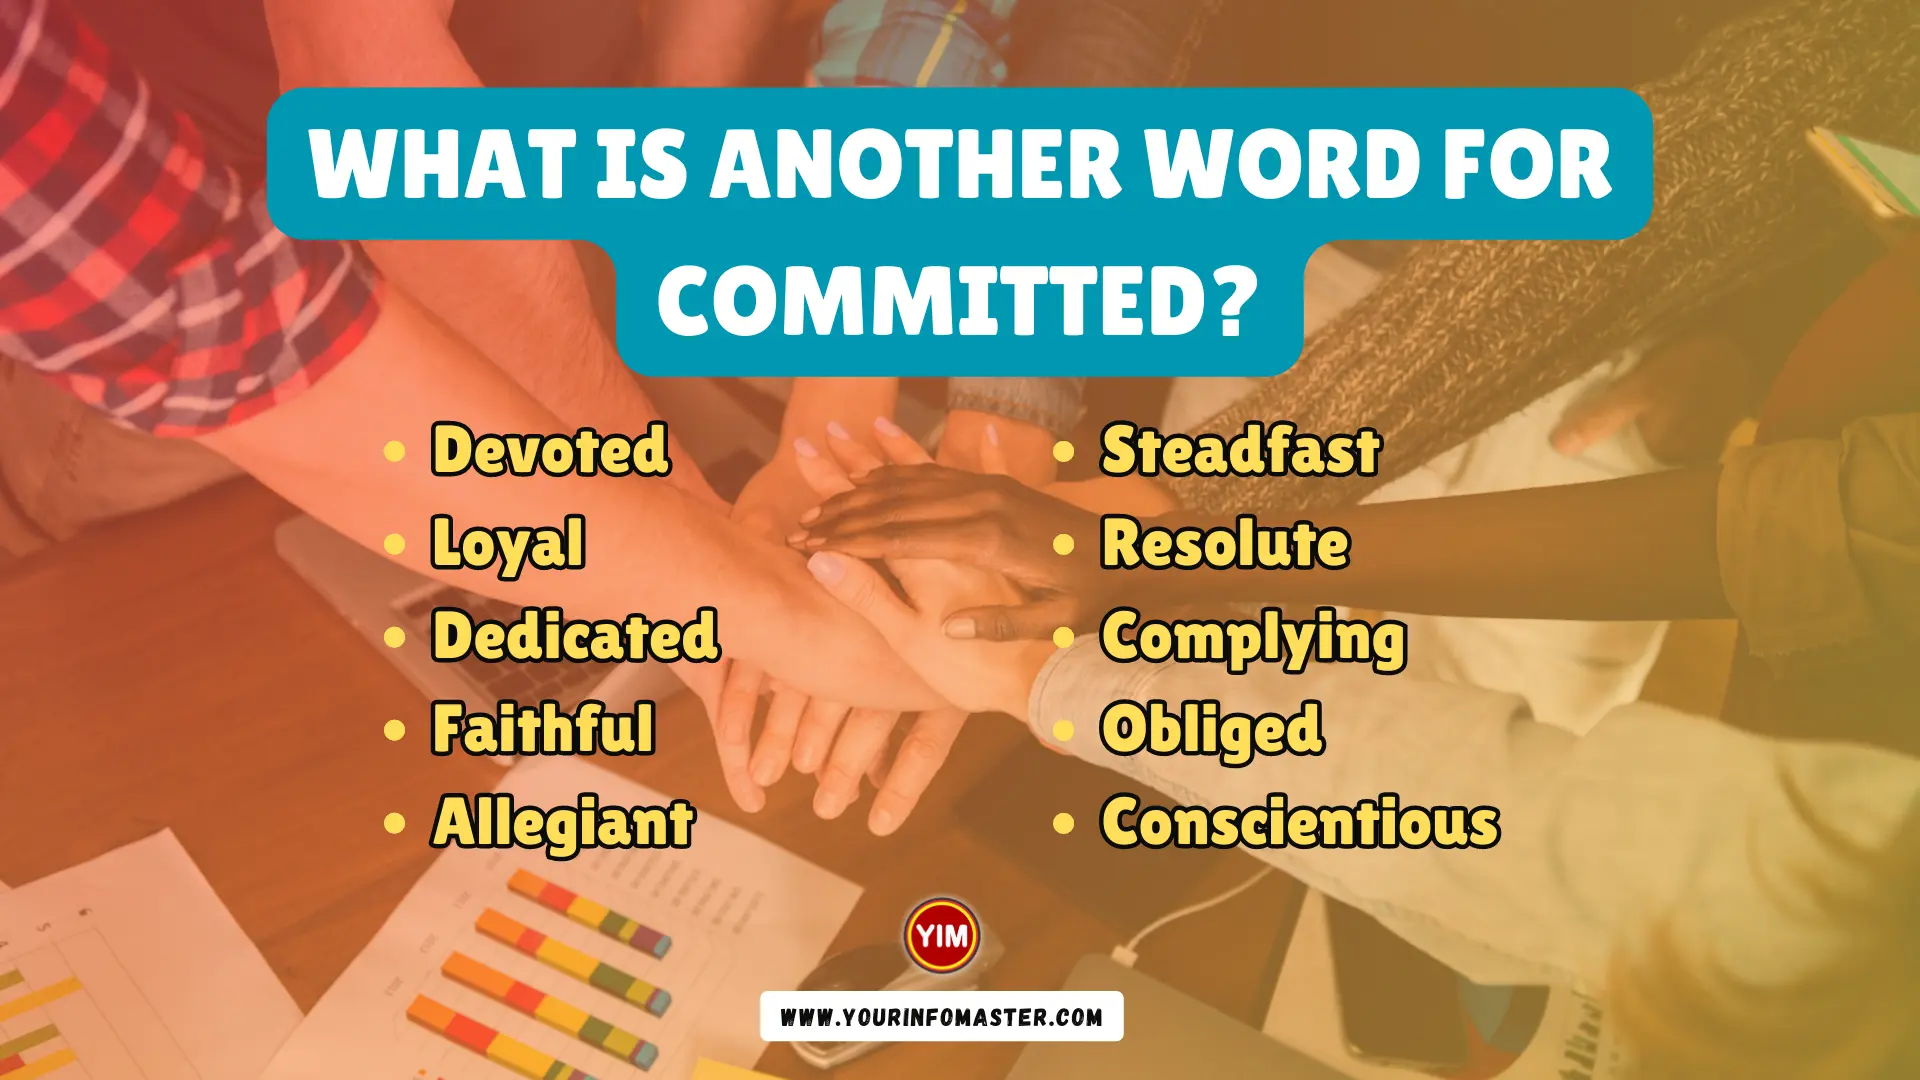 What is another word for Committed